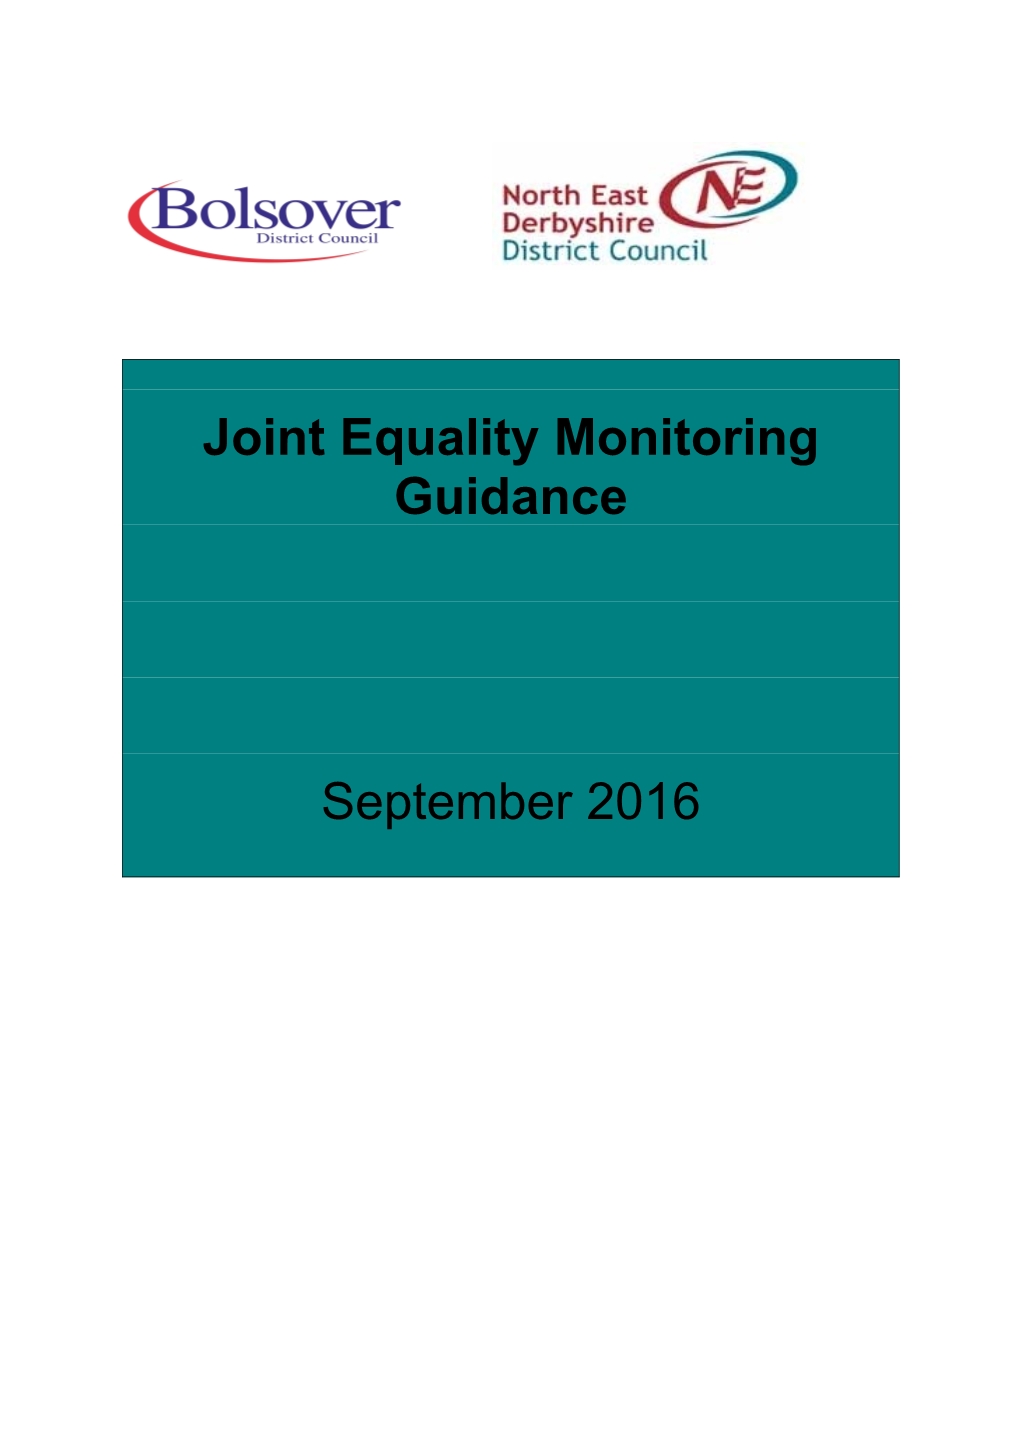 Joint Equality Monitoring Guidance